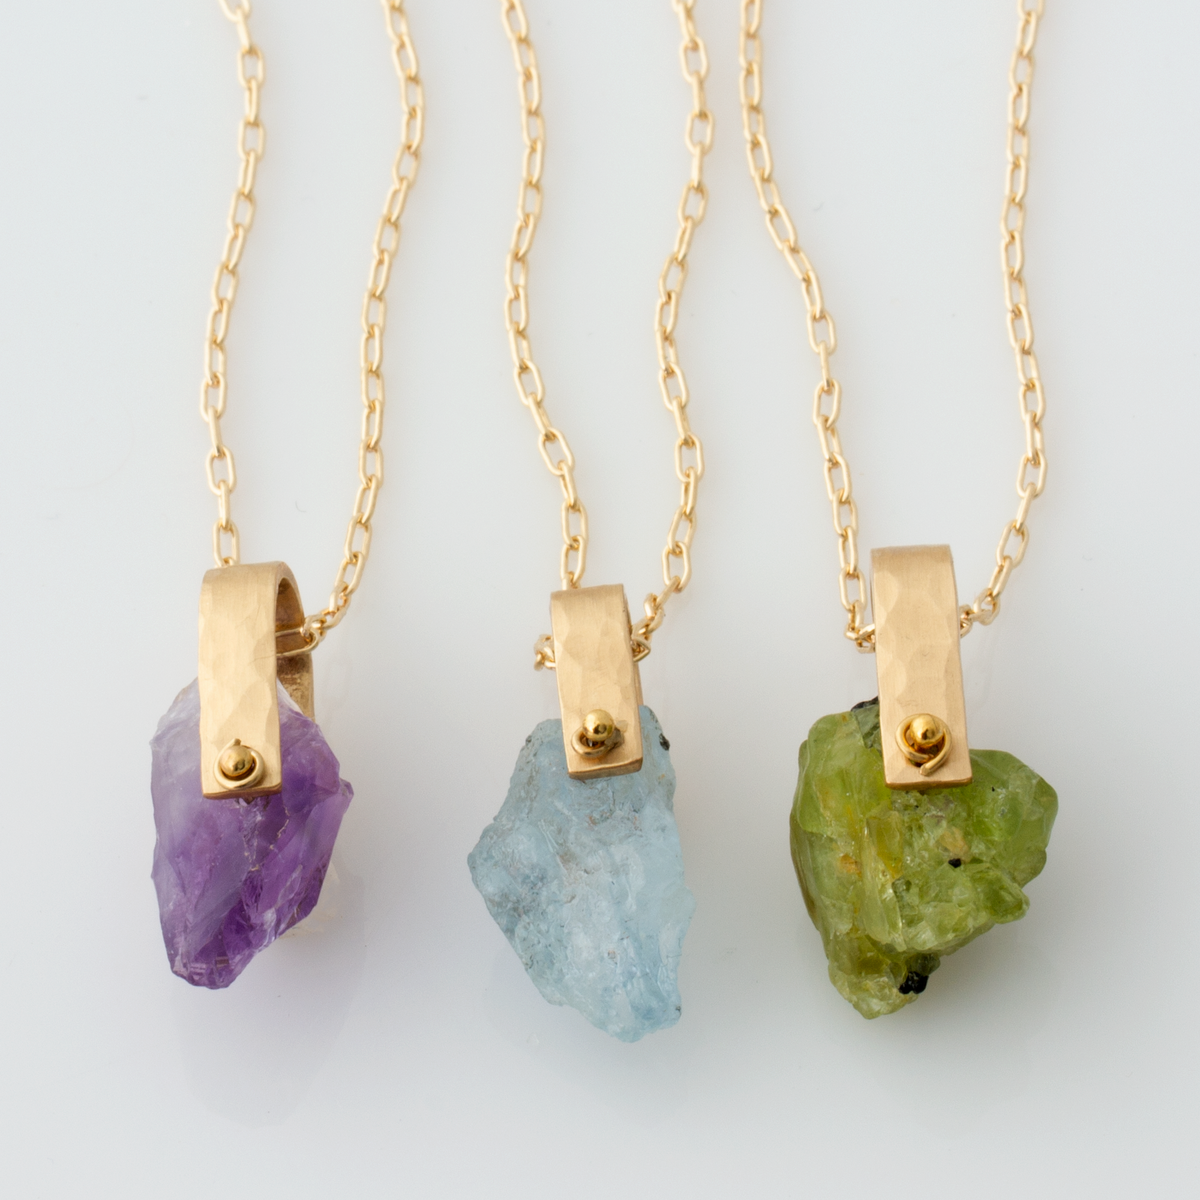 Large Suspended Raw Stone Necklace